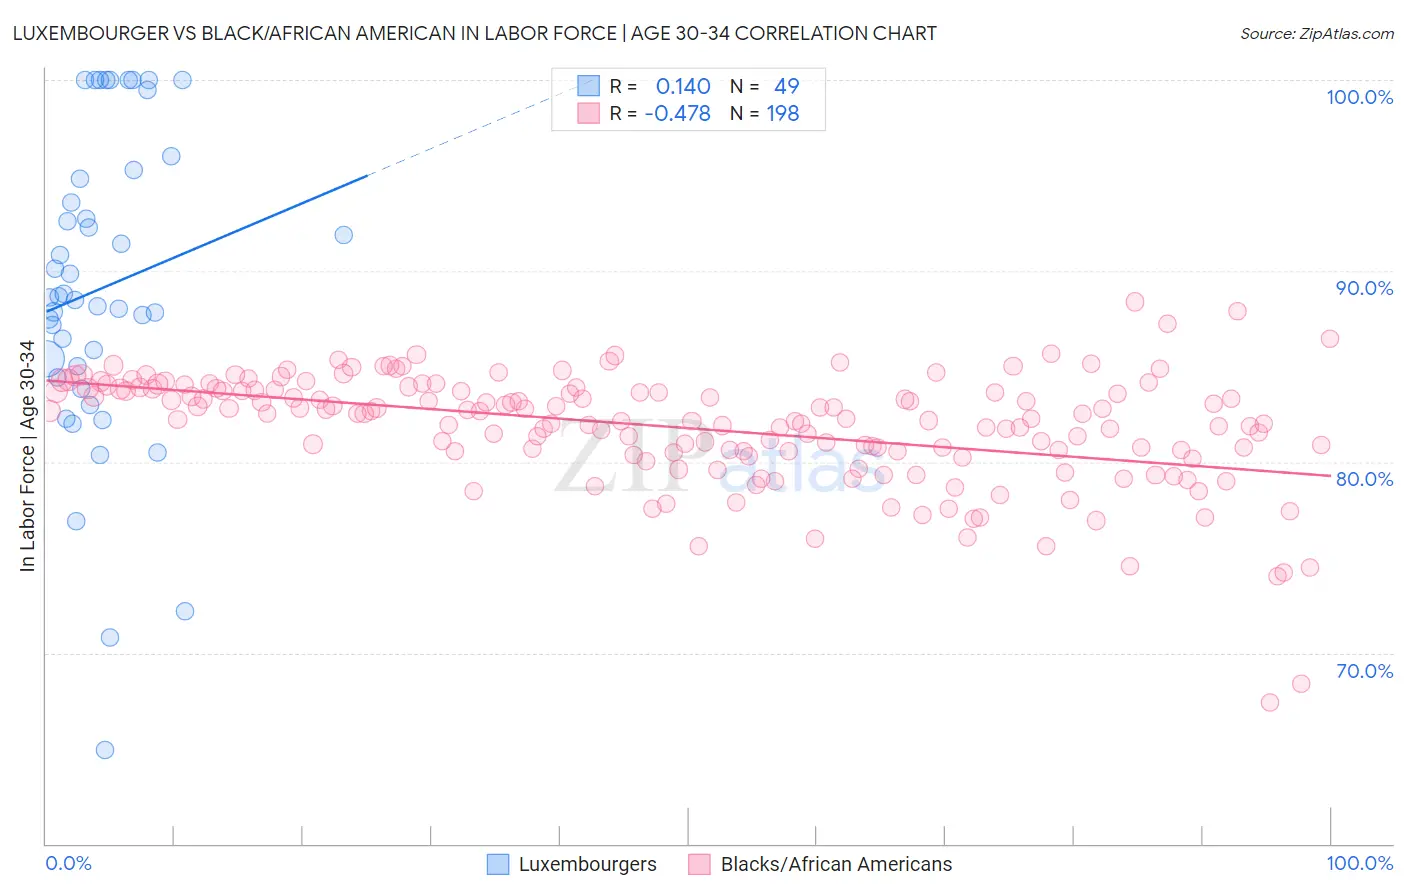 Luxembourger vs Black/African American In Labor Force | Age 30-34